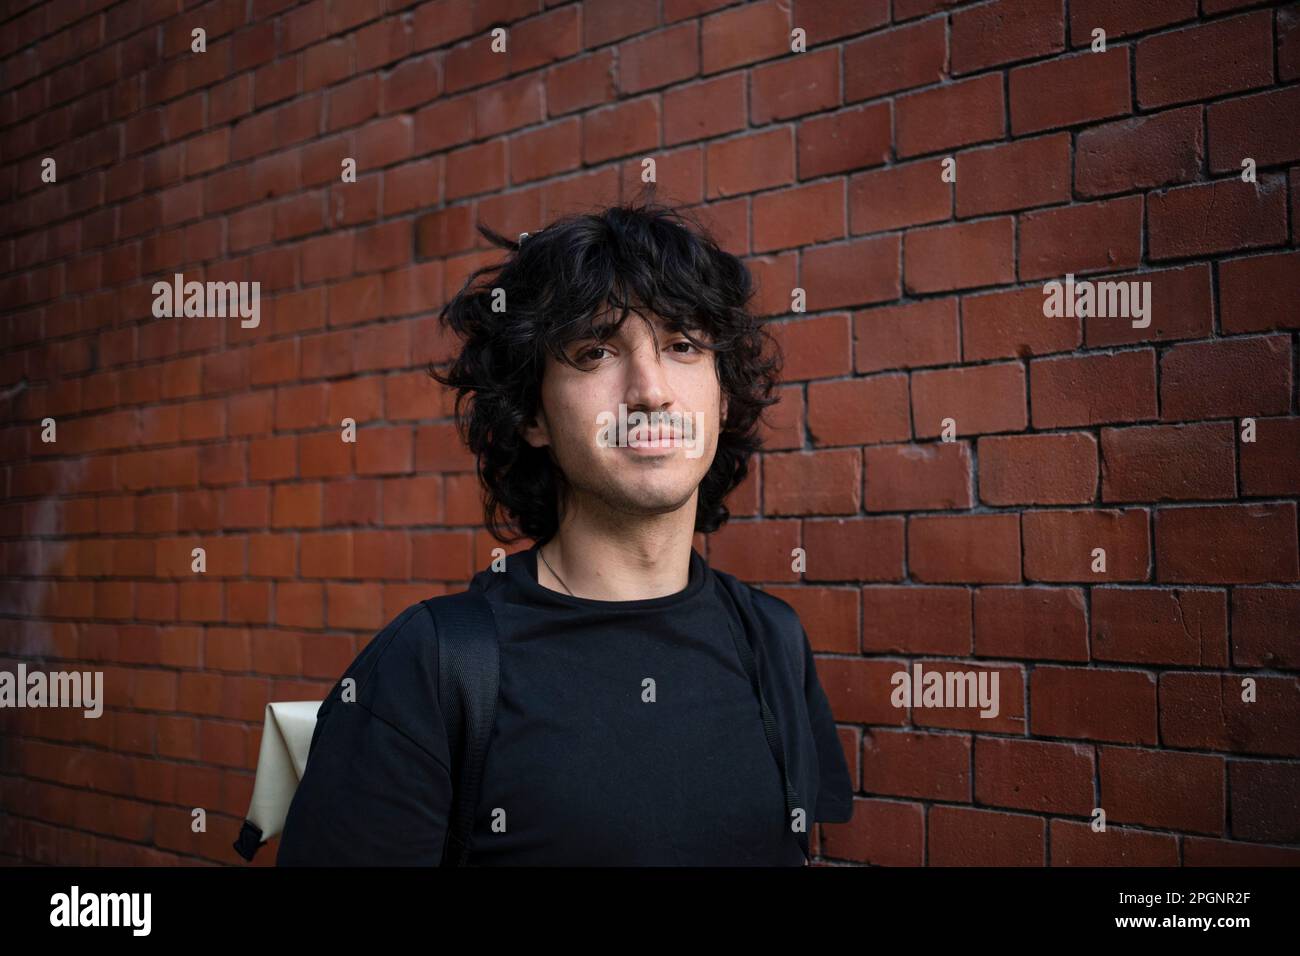 Smiling young man by brick wall Stock Photo